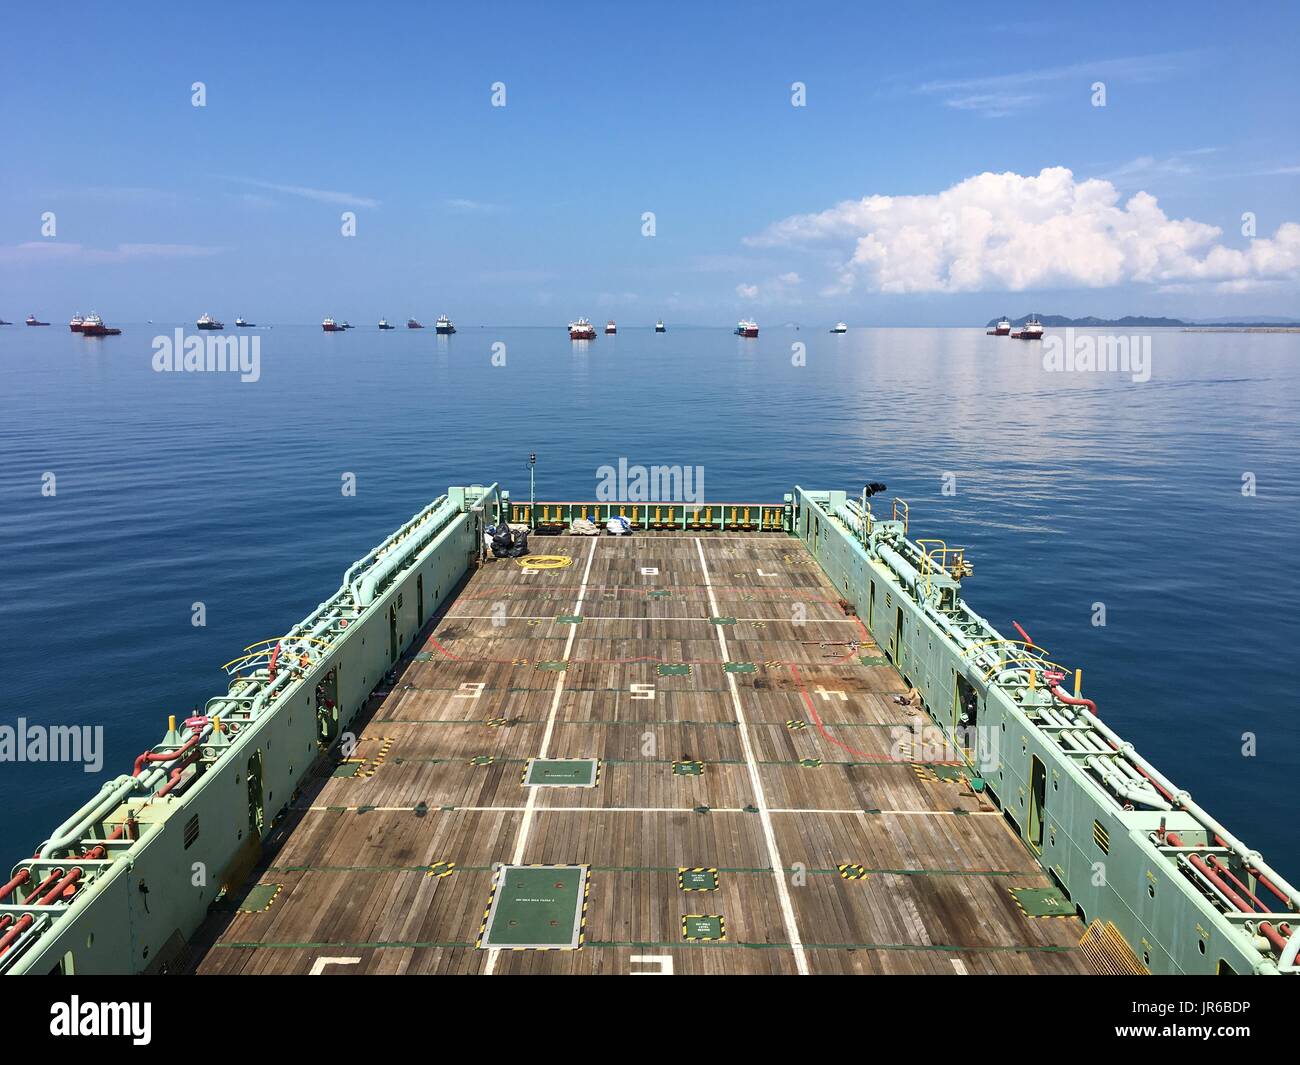 Main deck of an offshore platform supply vessel at sea Stock Photo